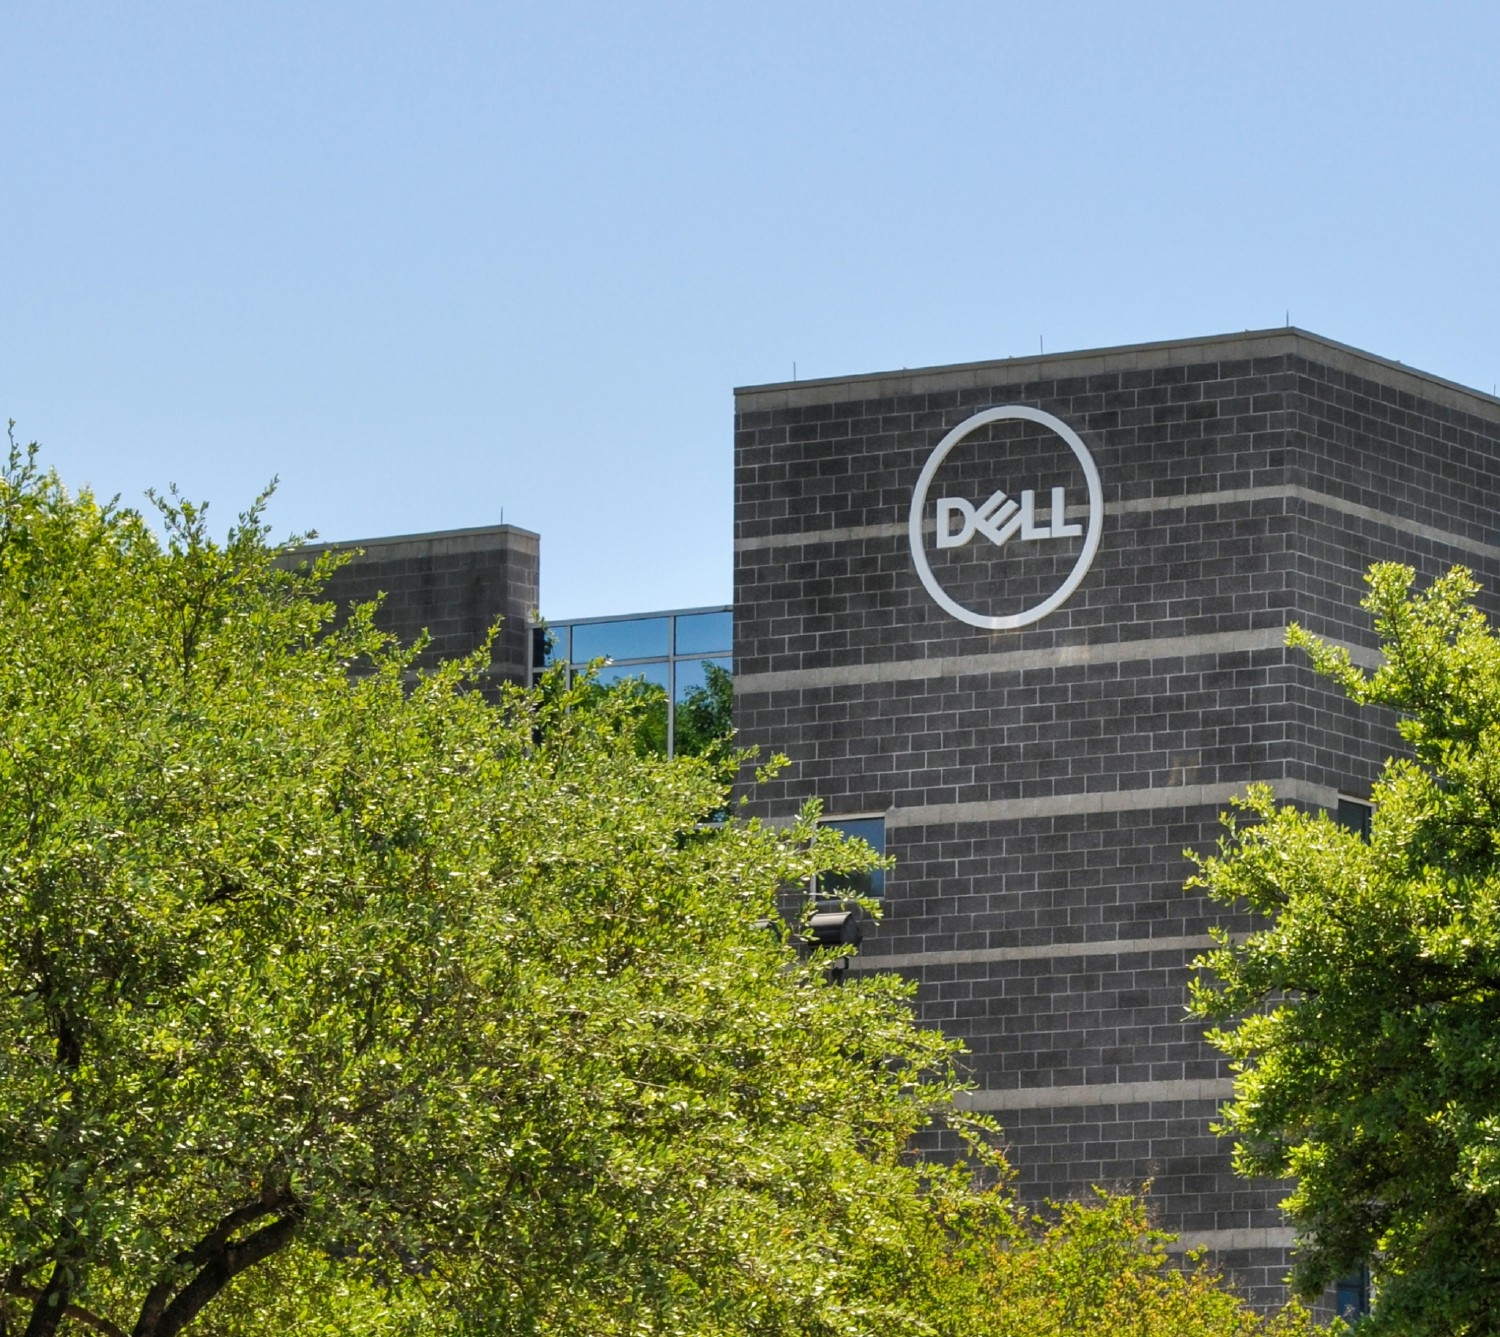 Dell Technologies headquarters in Round Rock, TX